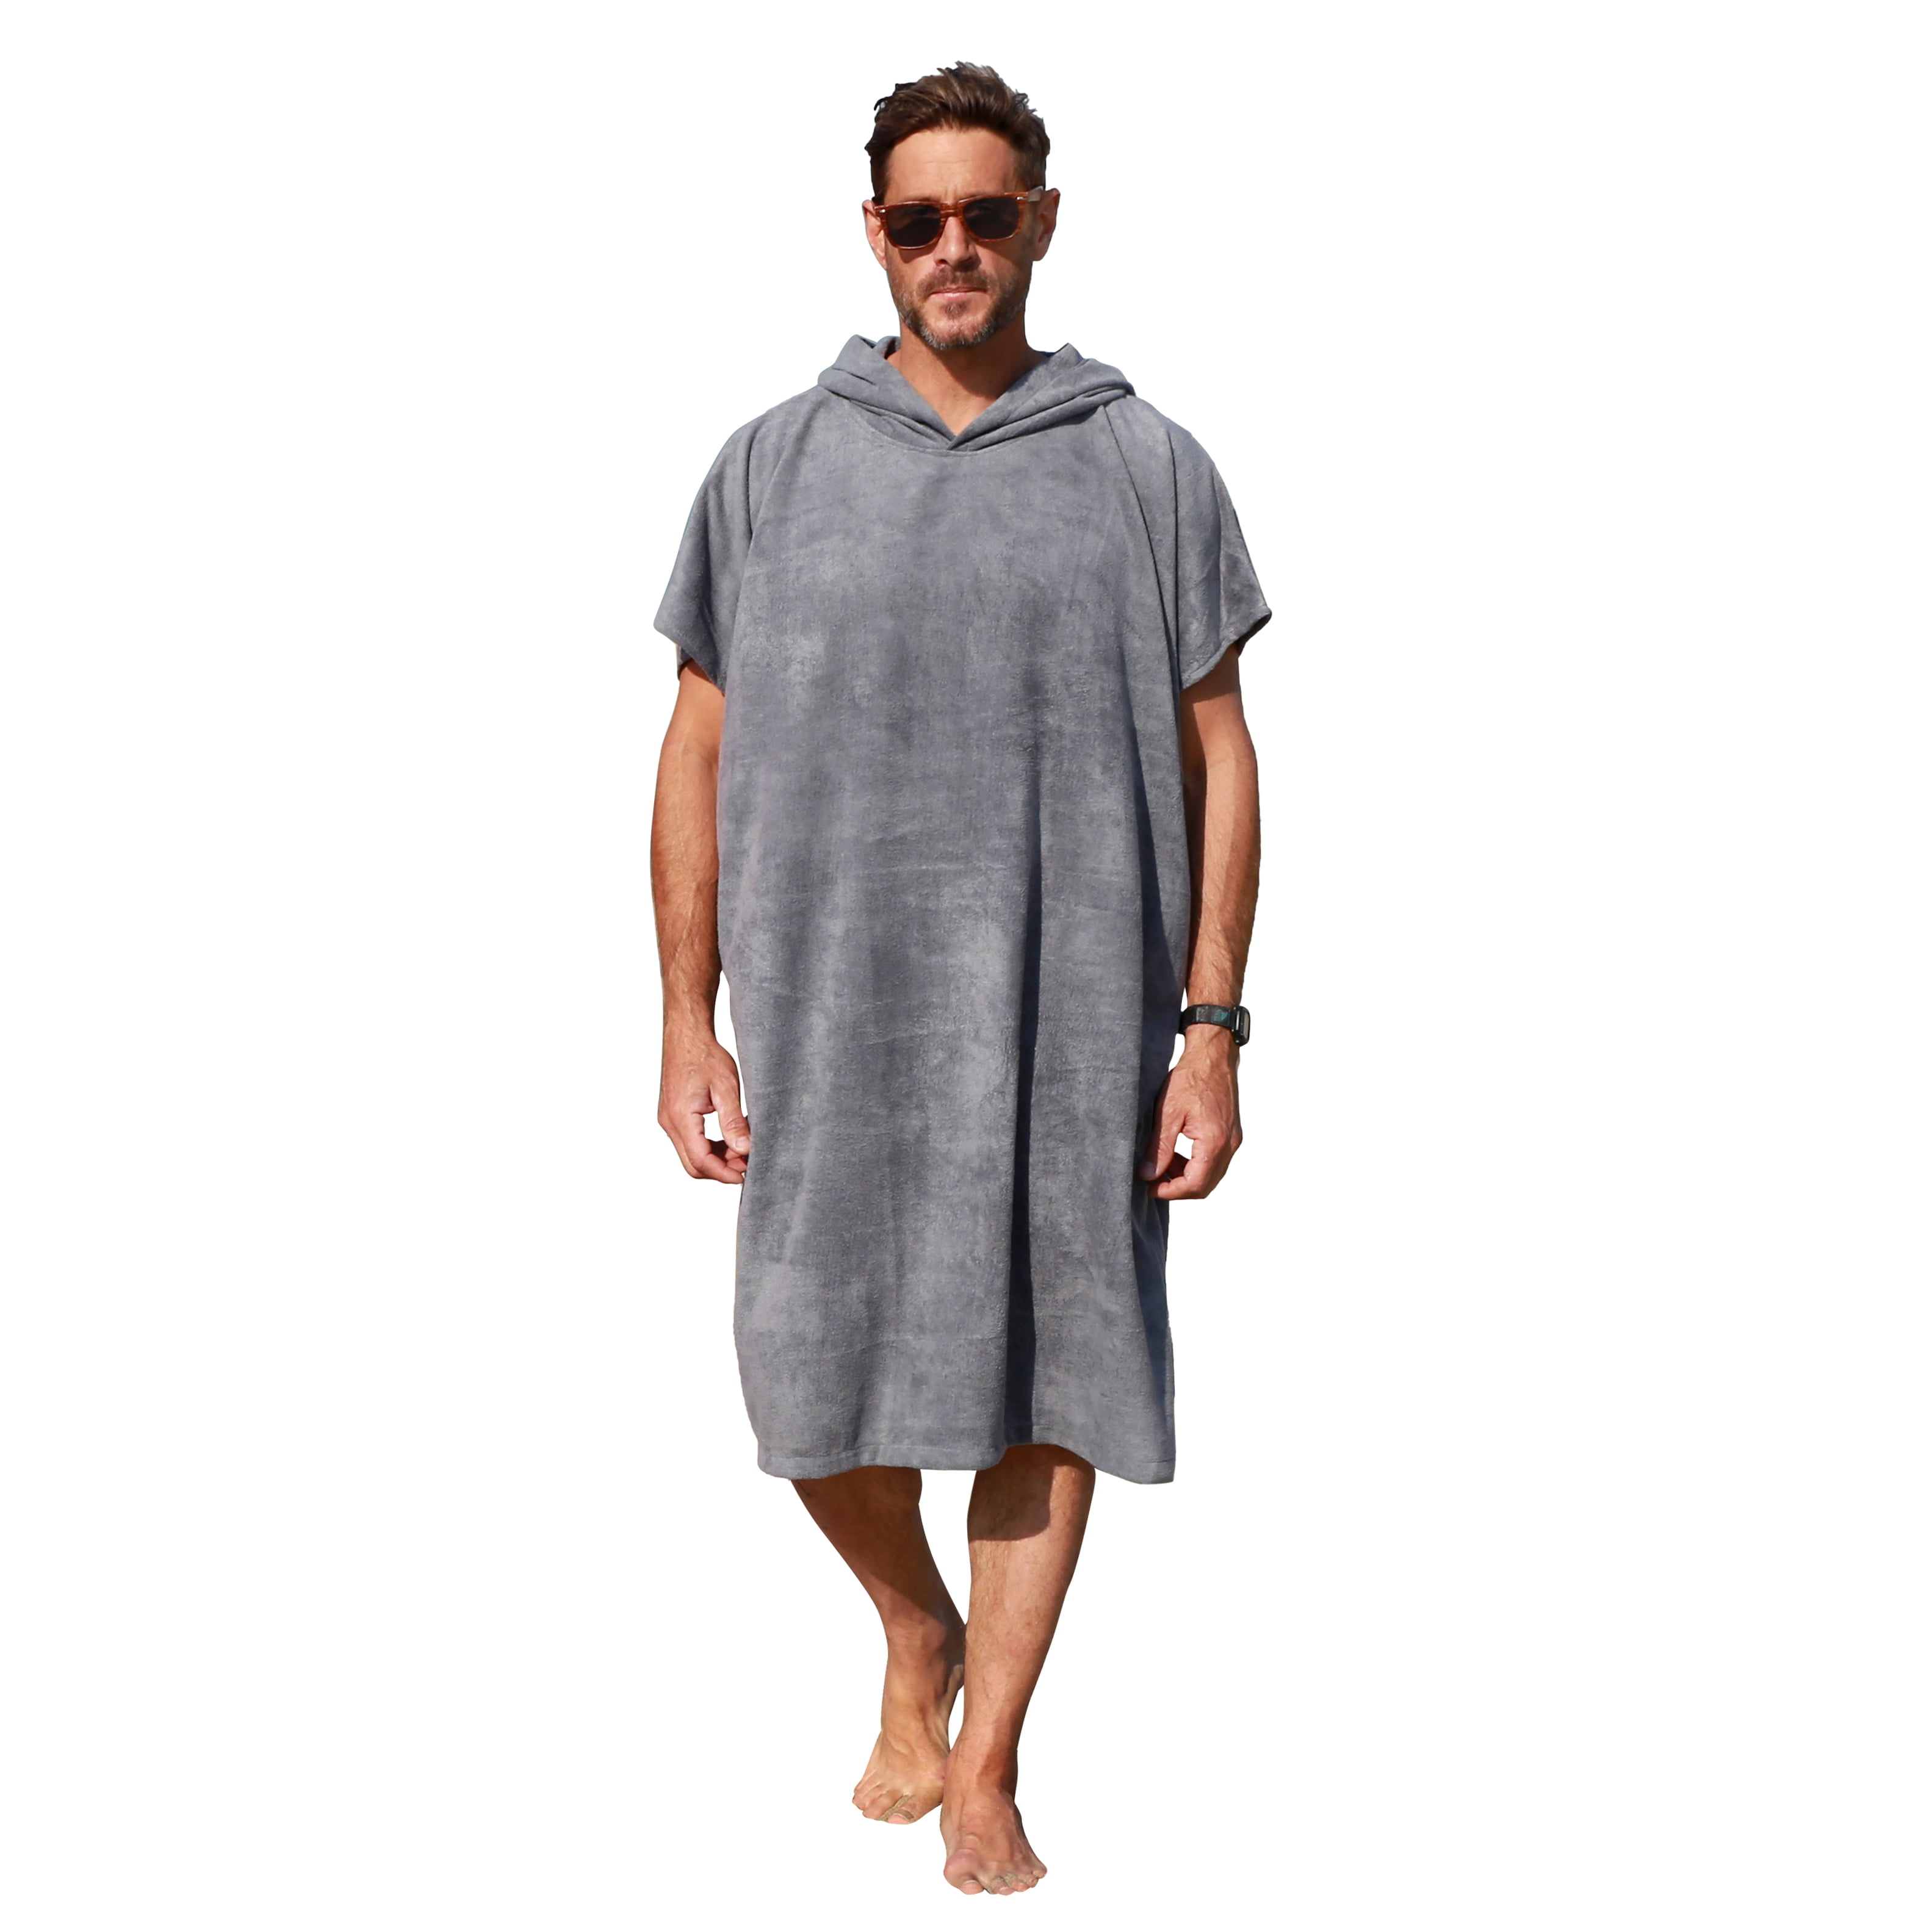 Hooded Poncho Towel Changing Robe Adult Beach Towel Surf Swiming US 